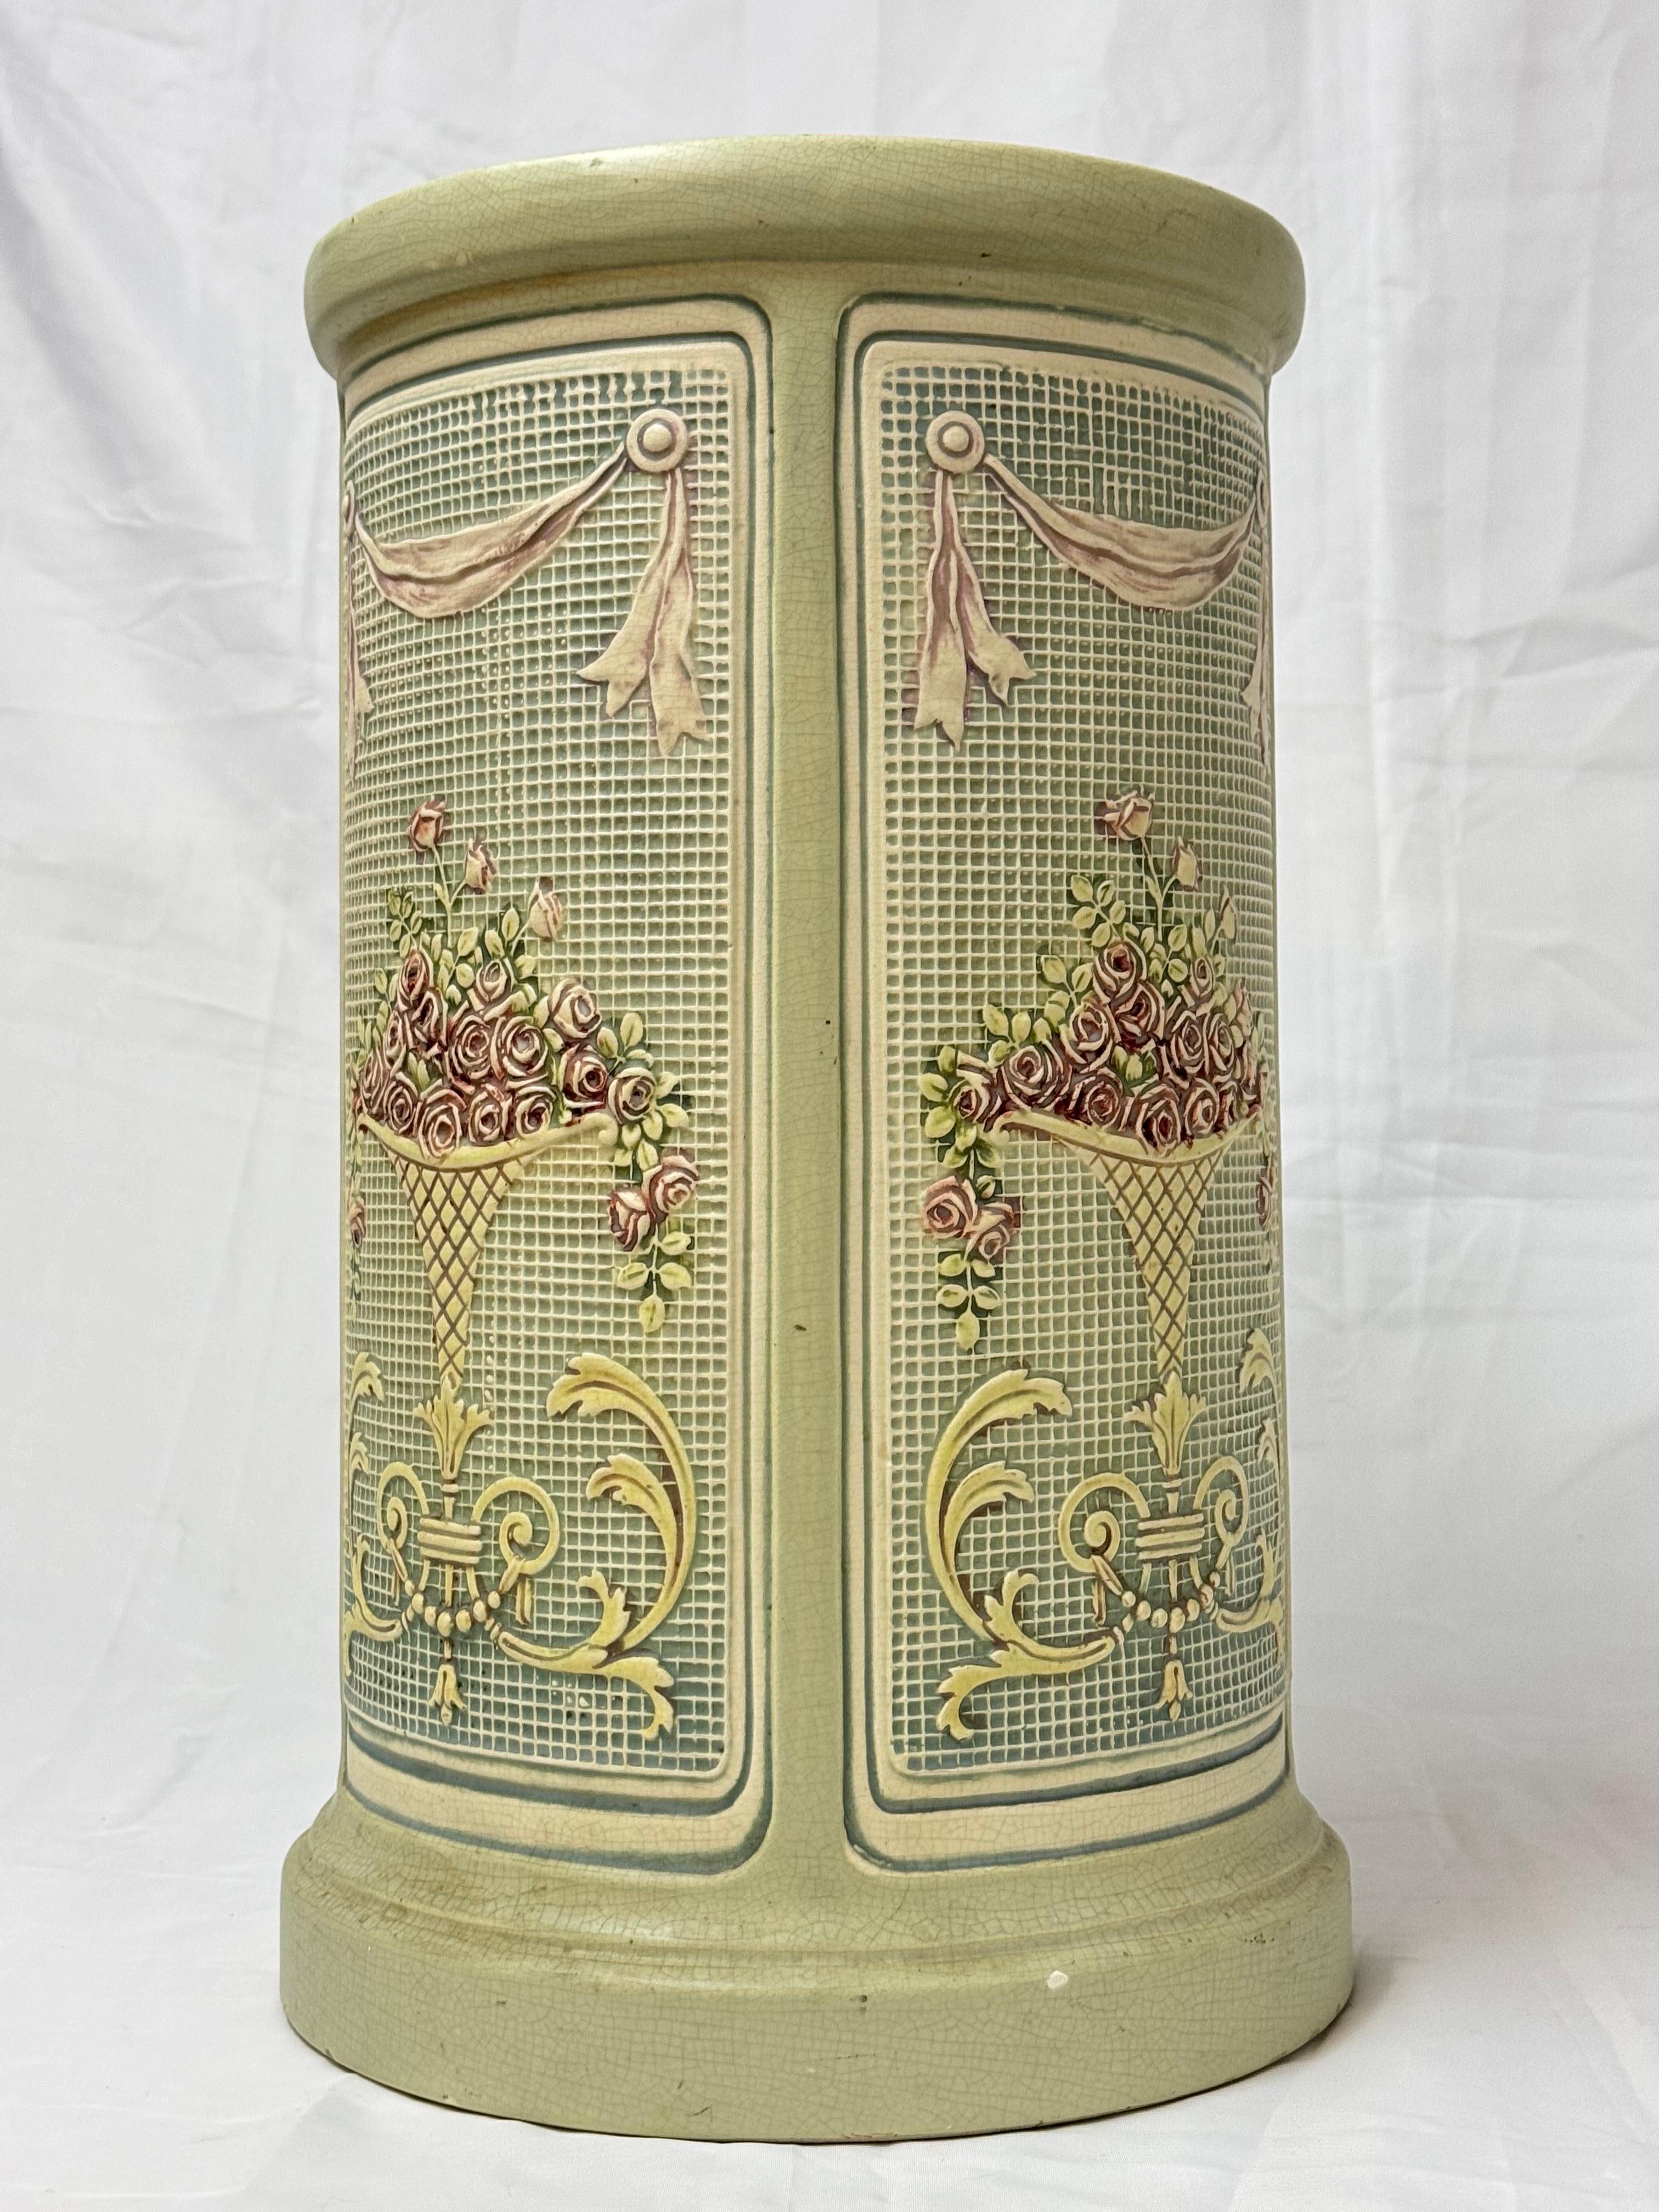 Rare and Collectible Weller Dupont Jardiniere In Good Condition For Sale In Redding, CT